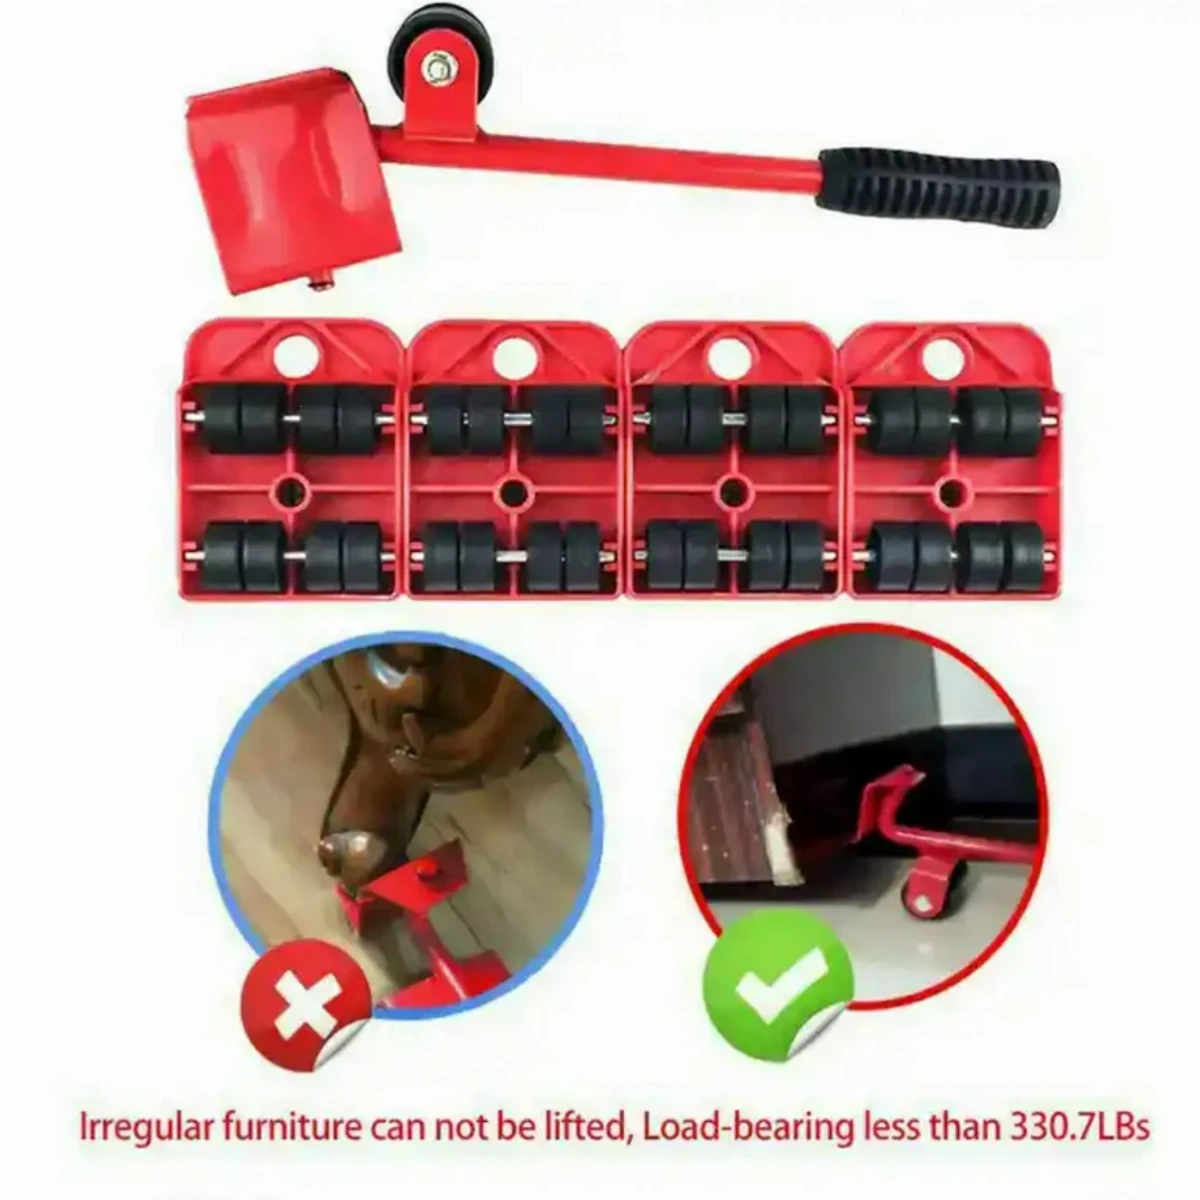 HEAVY FURNITURE MOVING LIFTER 4 MOVING SLIDERS